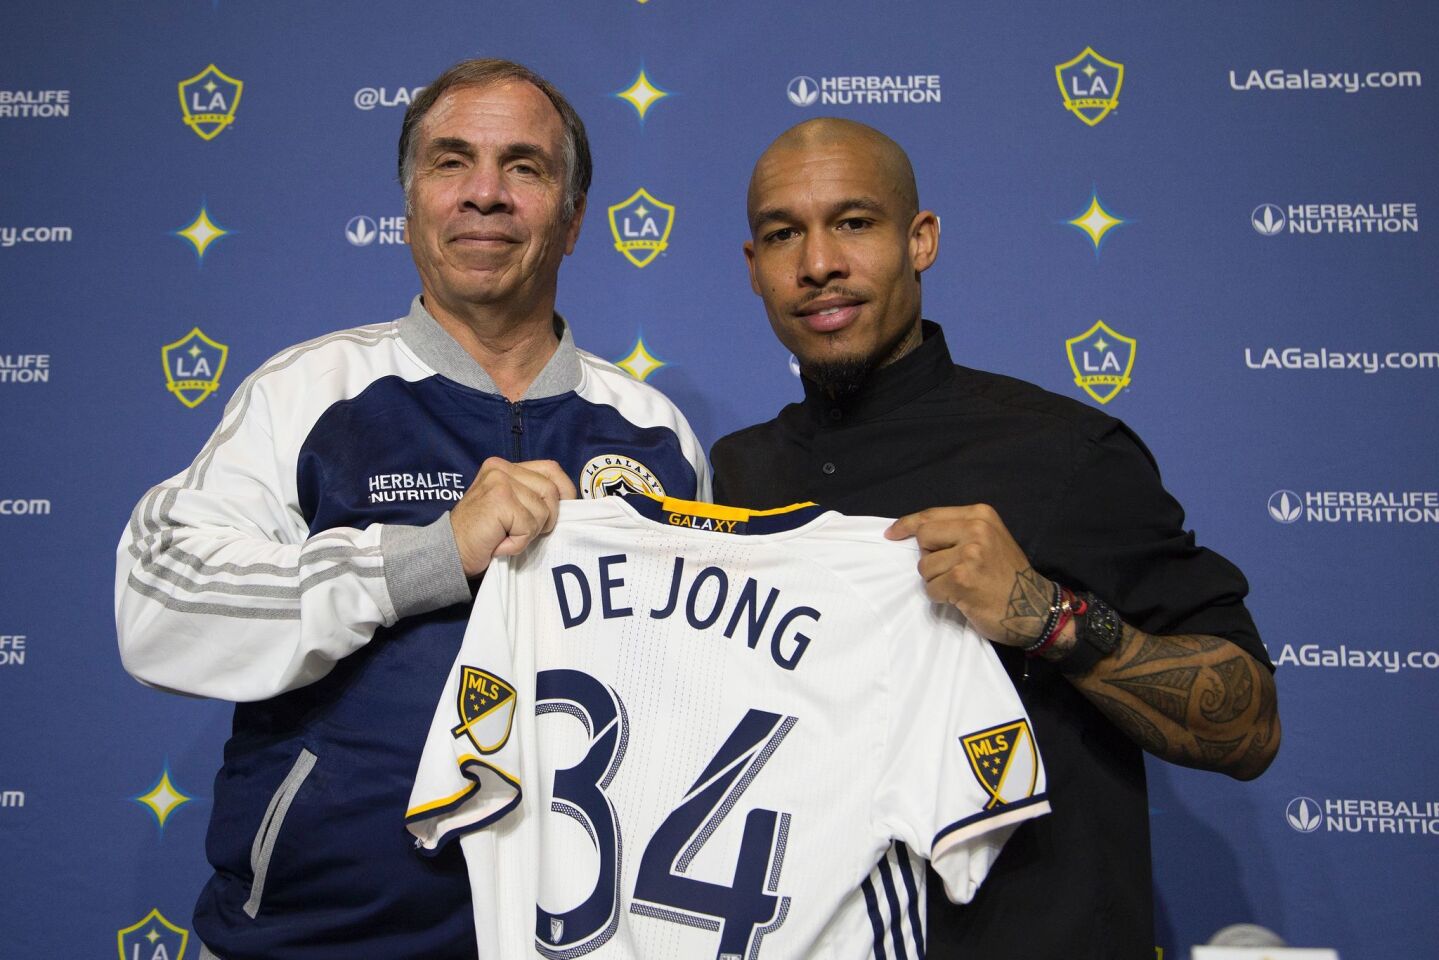 LA Galaxy Head Coach and General Manager Bruce Arena (L) and Midfielder Nigel de Jong hold his new jersey up for members of the press as the newest signed player for the LA Galaxy soccer team at the StubHub Center, February 16, 2016 in Carson, California. De Jong represented the Dutch at the FIFA World Cup in 2010 and 2014 and helped his country qualify in 2006 before an injury kept him out of the tournament. / AFP / David McNewDAVID MCNEW/AFP/Getty Images ** OUTS - ELSENT, FPG, CM - OUTS * NM, PH, VA if sourced by CT, LA or MoD **